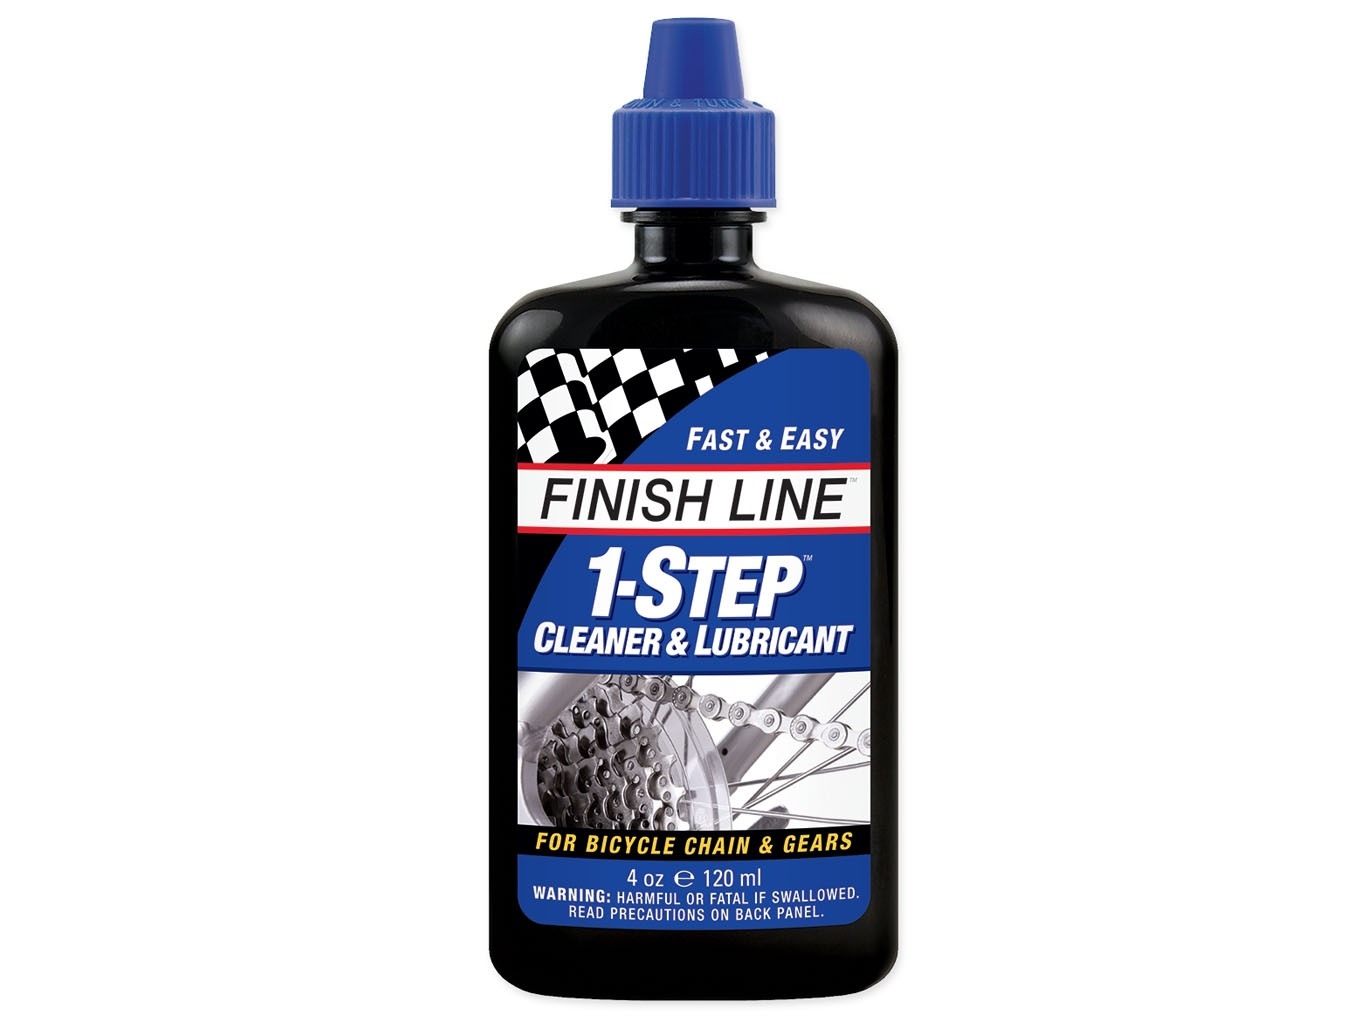 1-STEP CLEANER AND LUBRICANT